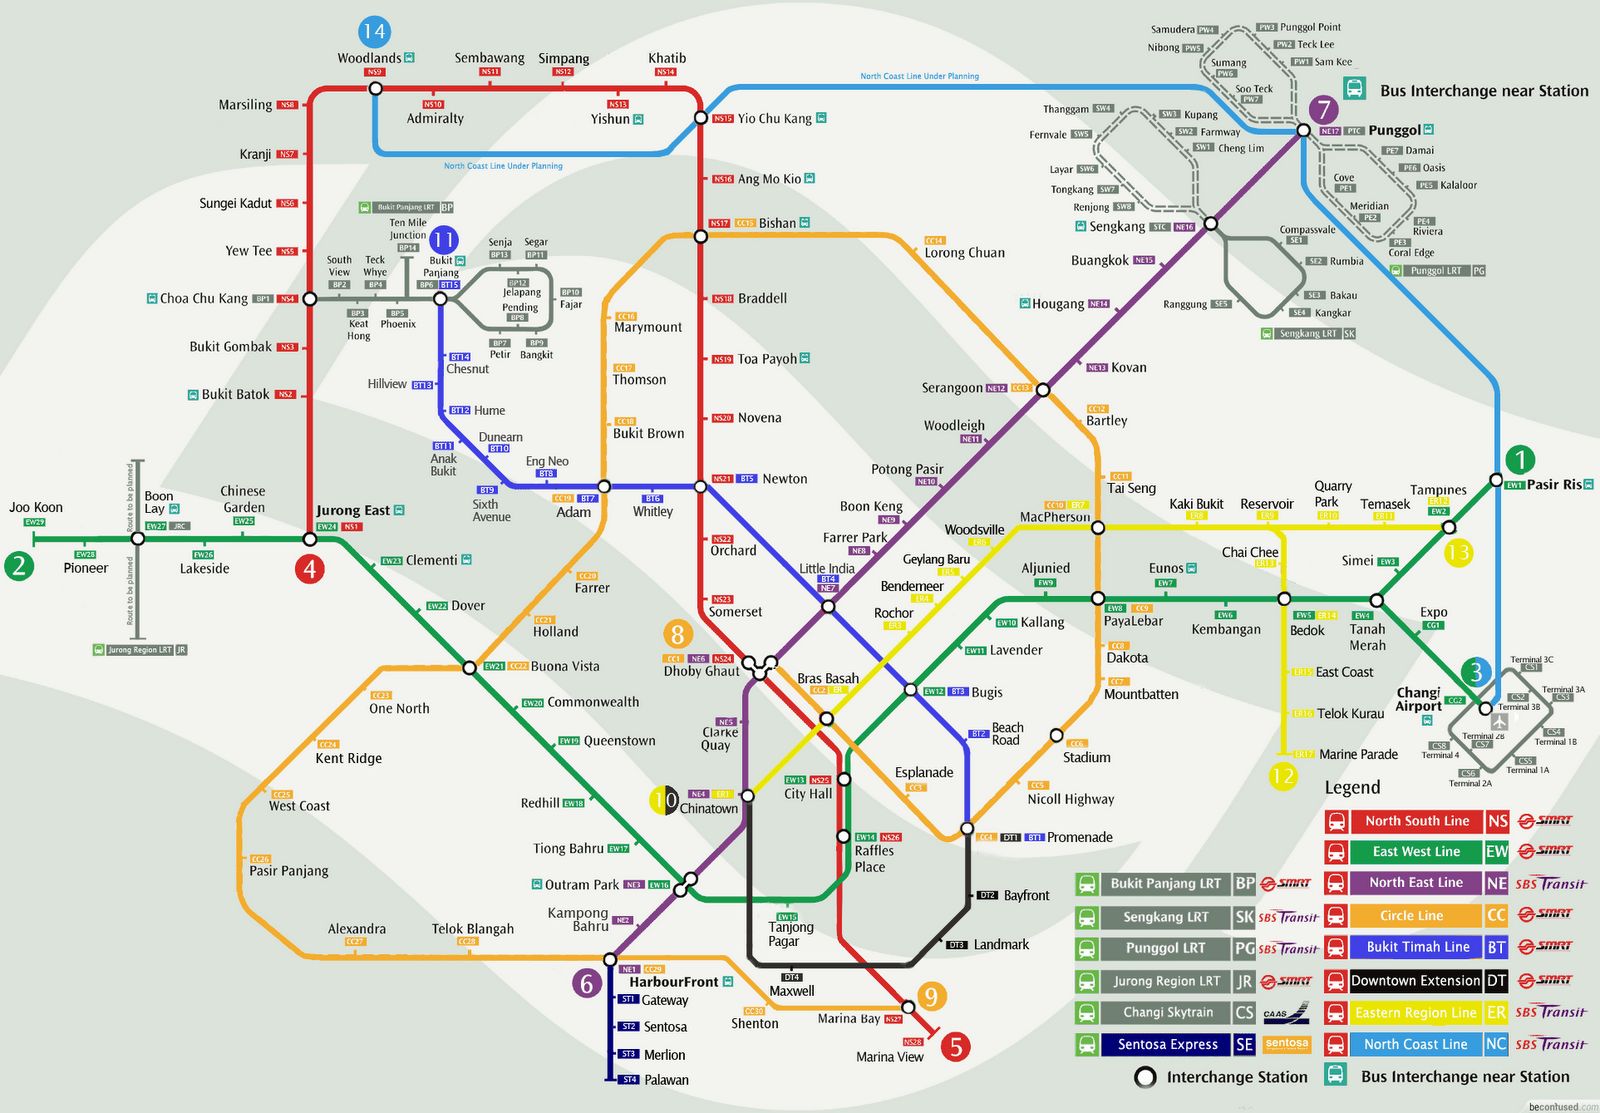 __a cup of life story__ Map of Singapore MRT Station